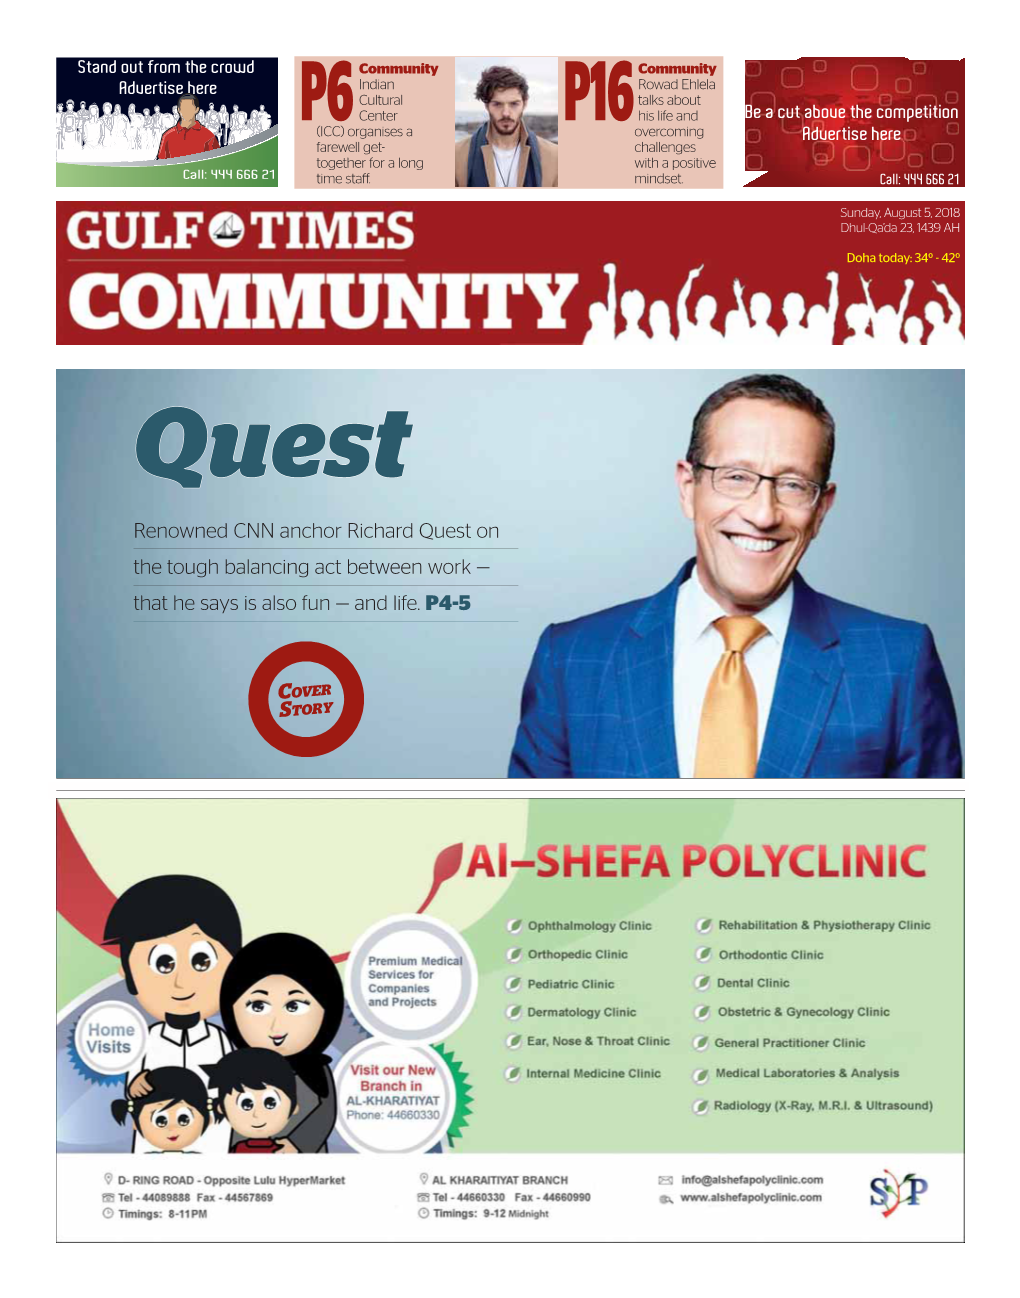 Renowned CNN Anchor Richard Quest on the Tough Balancing Act Between Work — That He Says Is Also Fun — and Life. P4-5